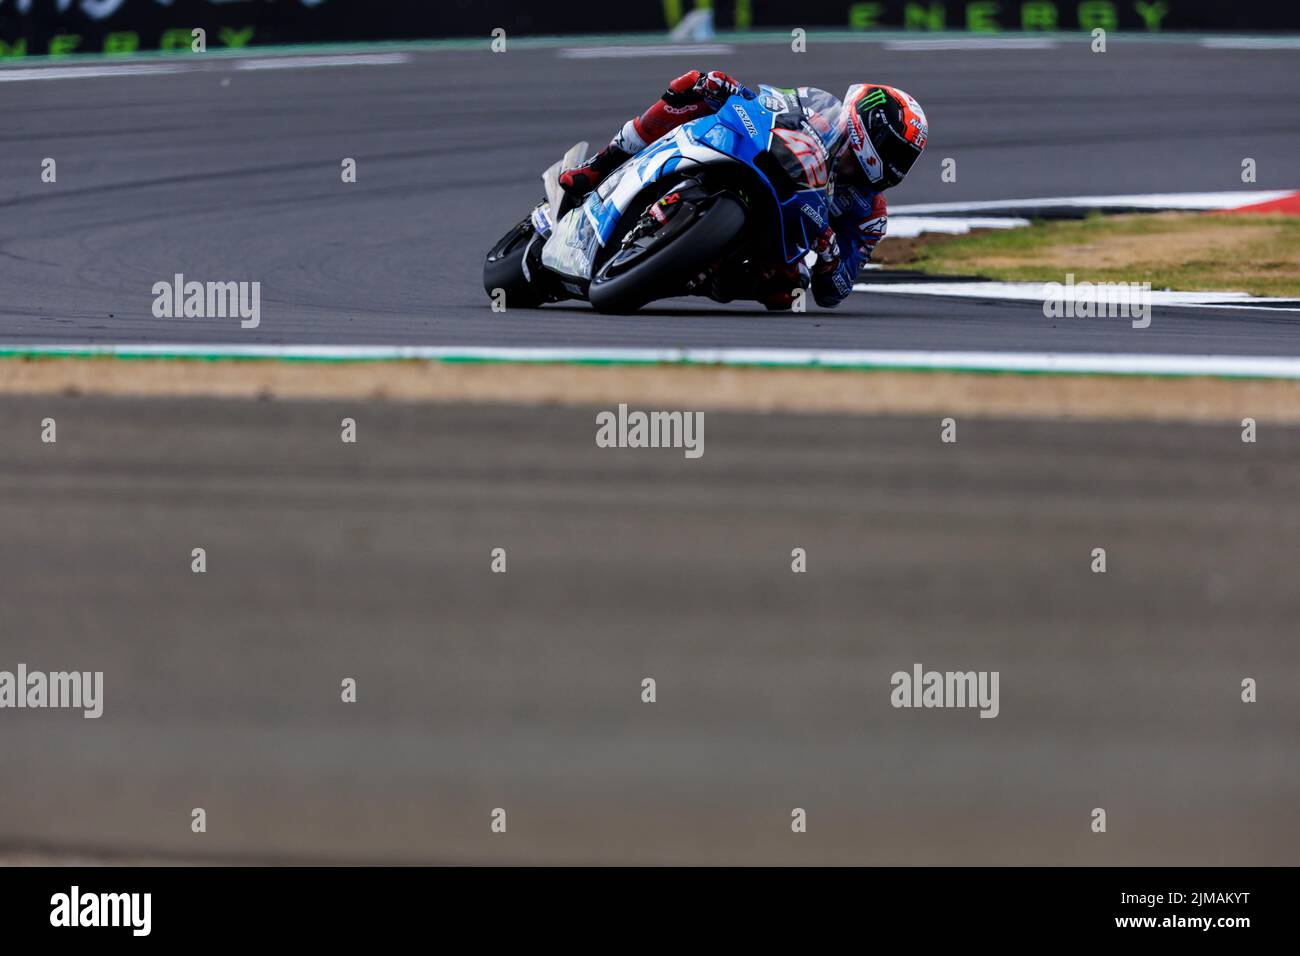 Silverstone, UK. 5th August 2022; Silverstone Circuit, Silverstone, Northamptonshire, England: British MotoGP Grand Prix, Free Practice: Number 42 Team Suzuki Ecstar bike ridden by Alex Rins during free practice 2 at the British MotoGP Credit: Action Plus Sports Images/Alamy Live News Stock Photo